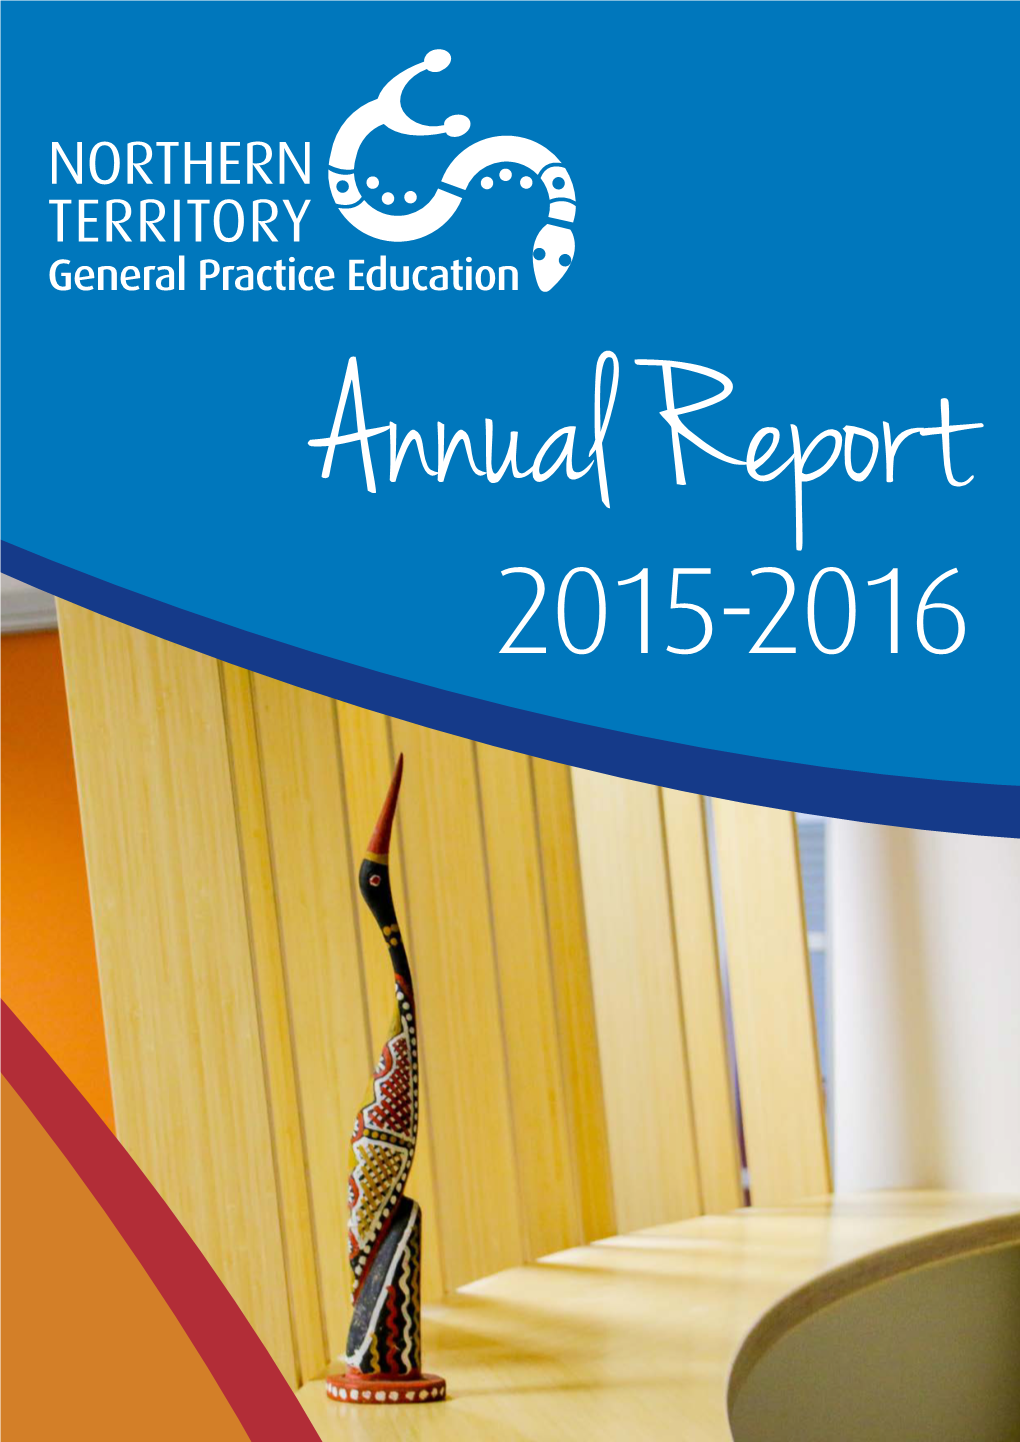 Annual Report 2015-2016 This Annual Report Was Produced by the NTGPE’S Marketing and Communications Team with Assistance from Staff